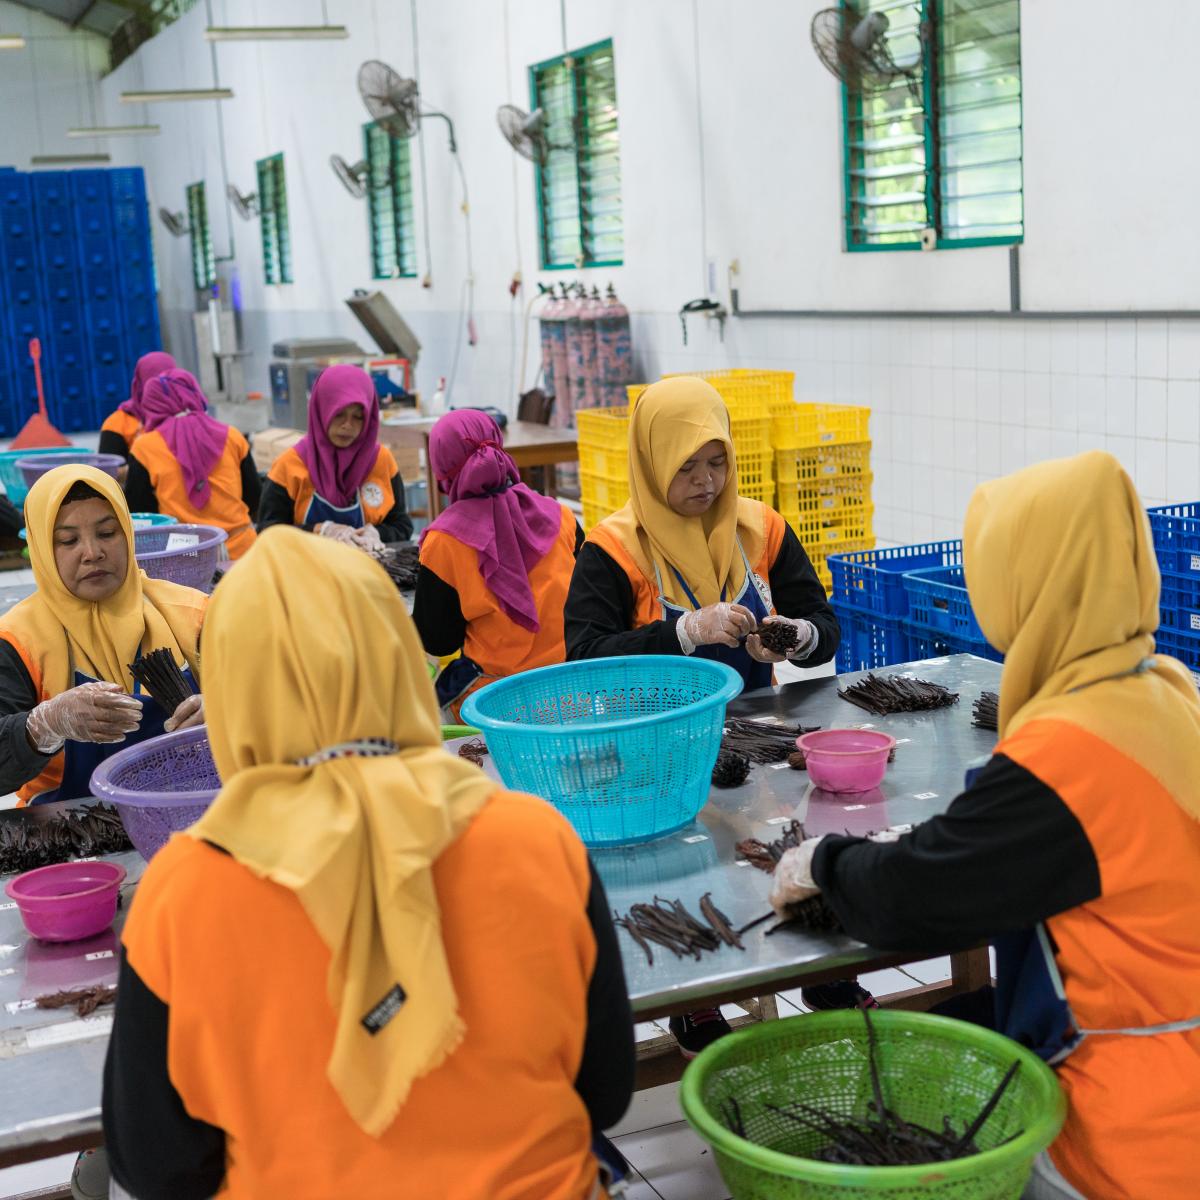 Workers process vanilla beans at the Cooperative Business International (CBI) spice factory in Klaten